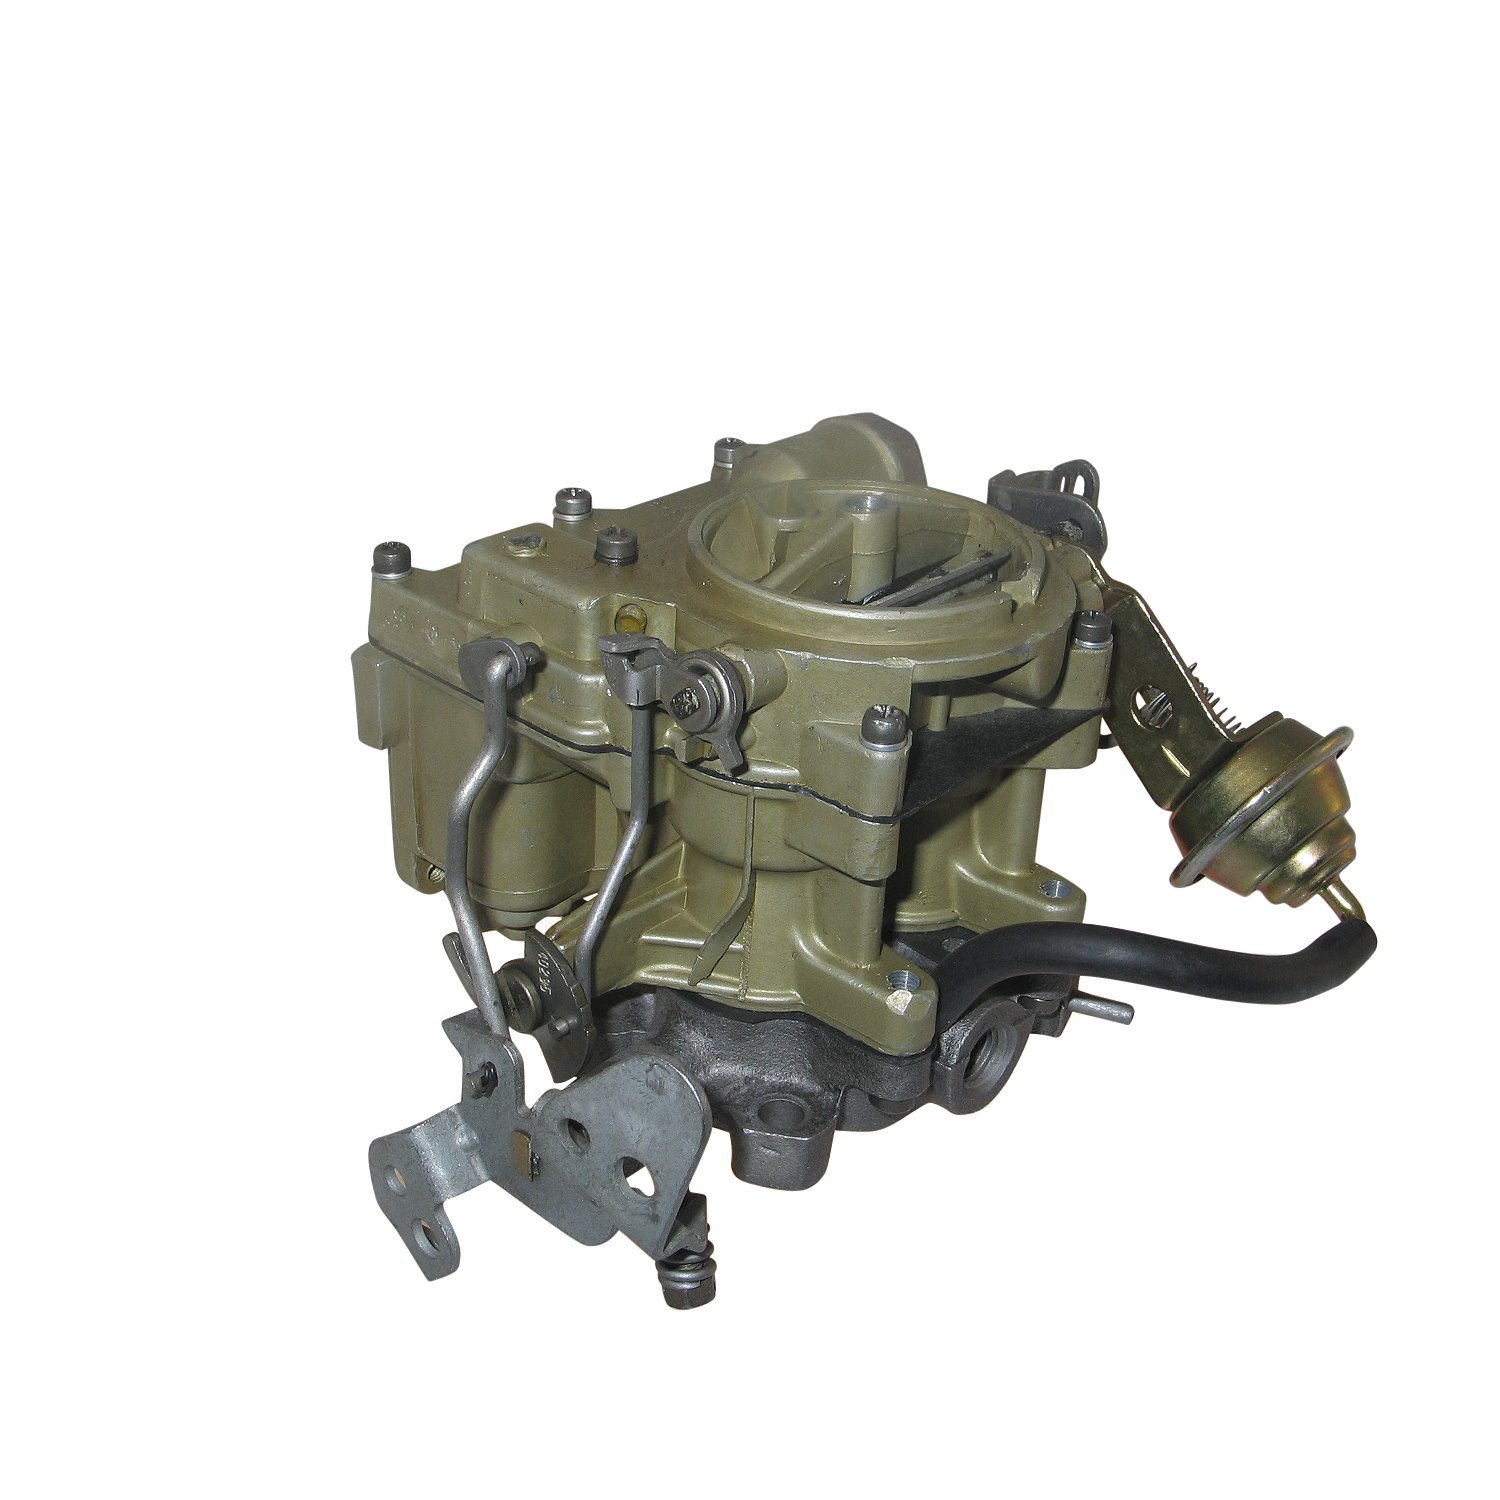 3-3370 Rochester Remanufactured Carburetor, 2GV-Style